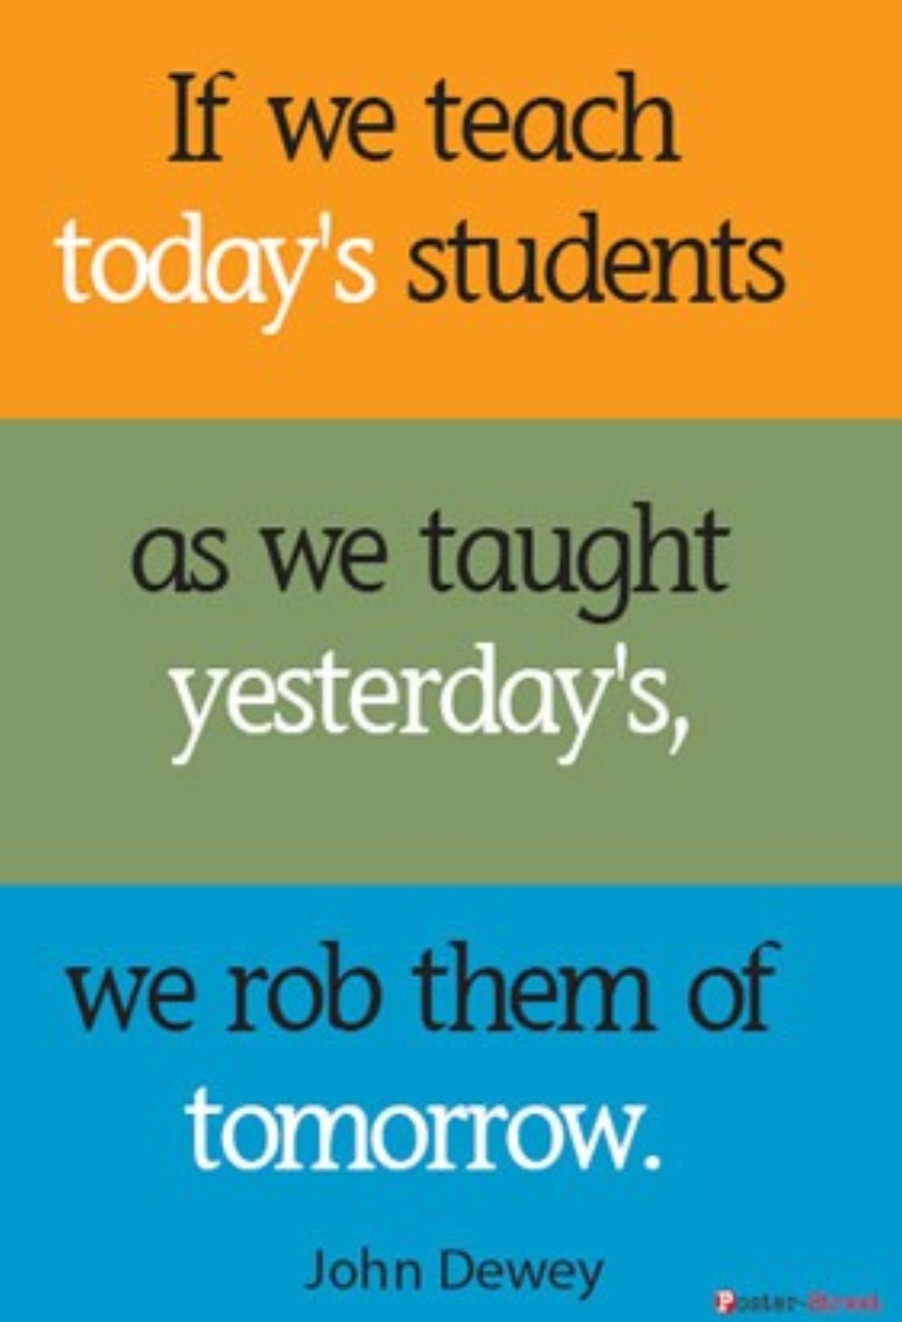 Great Philosophy Of Education Quotes in the world Check it out now 